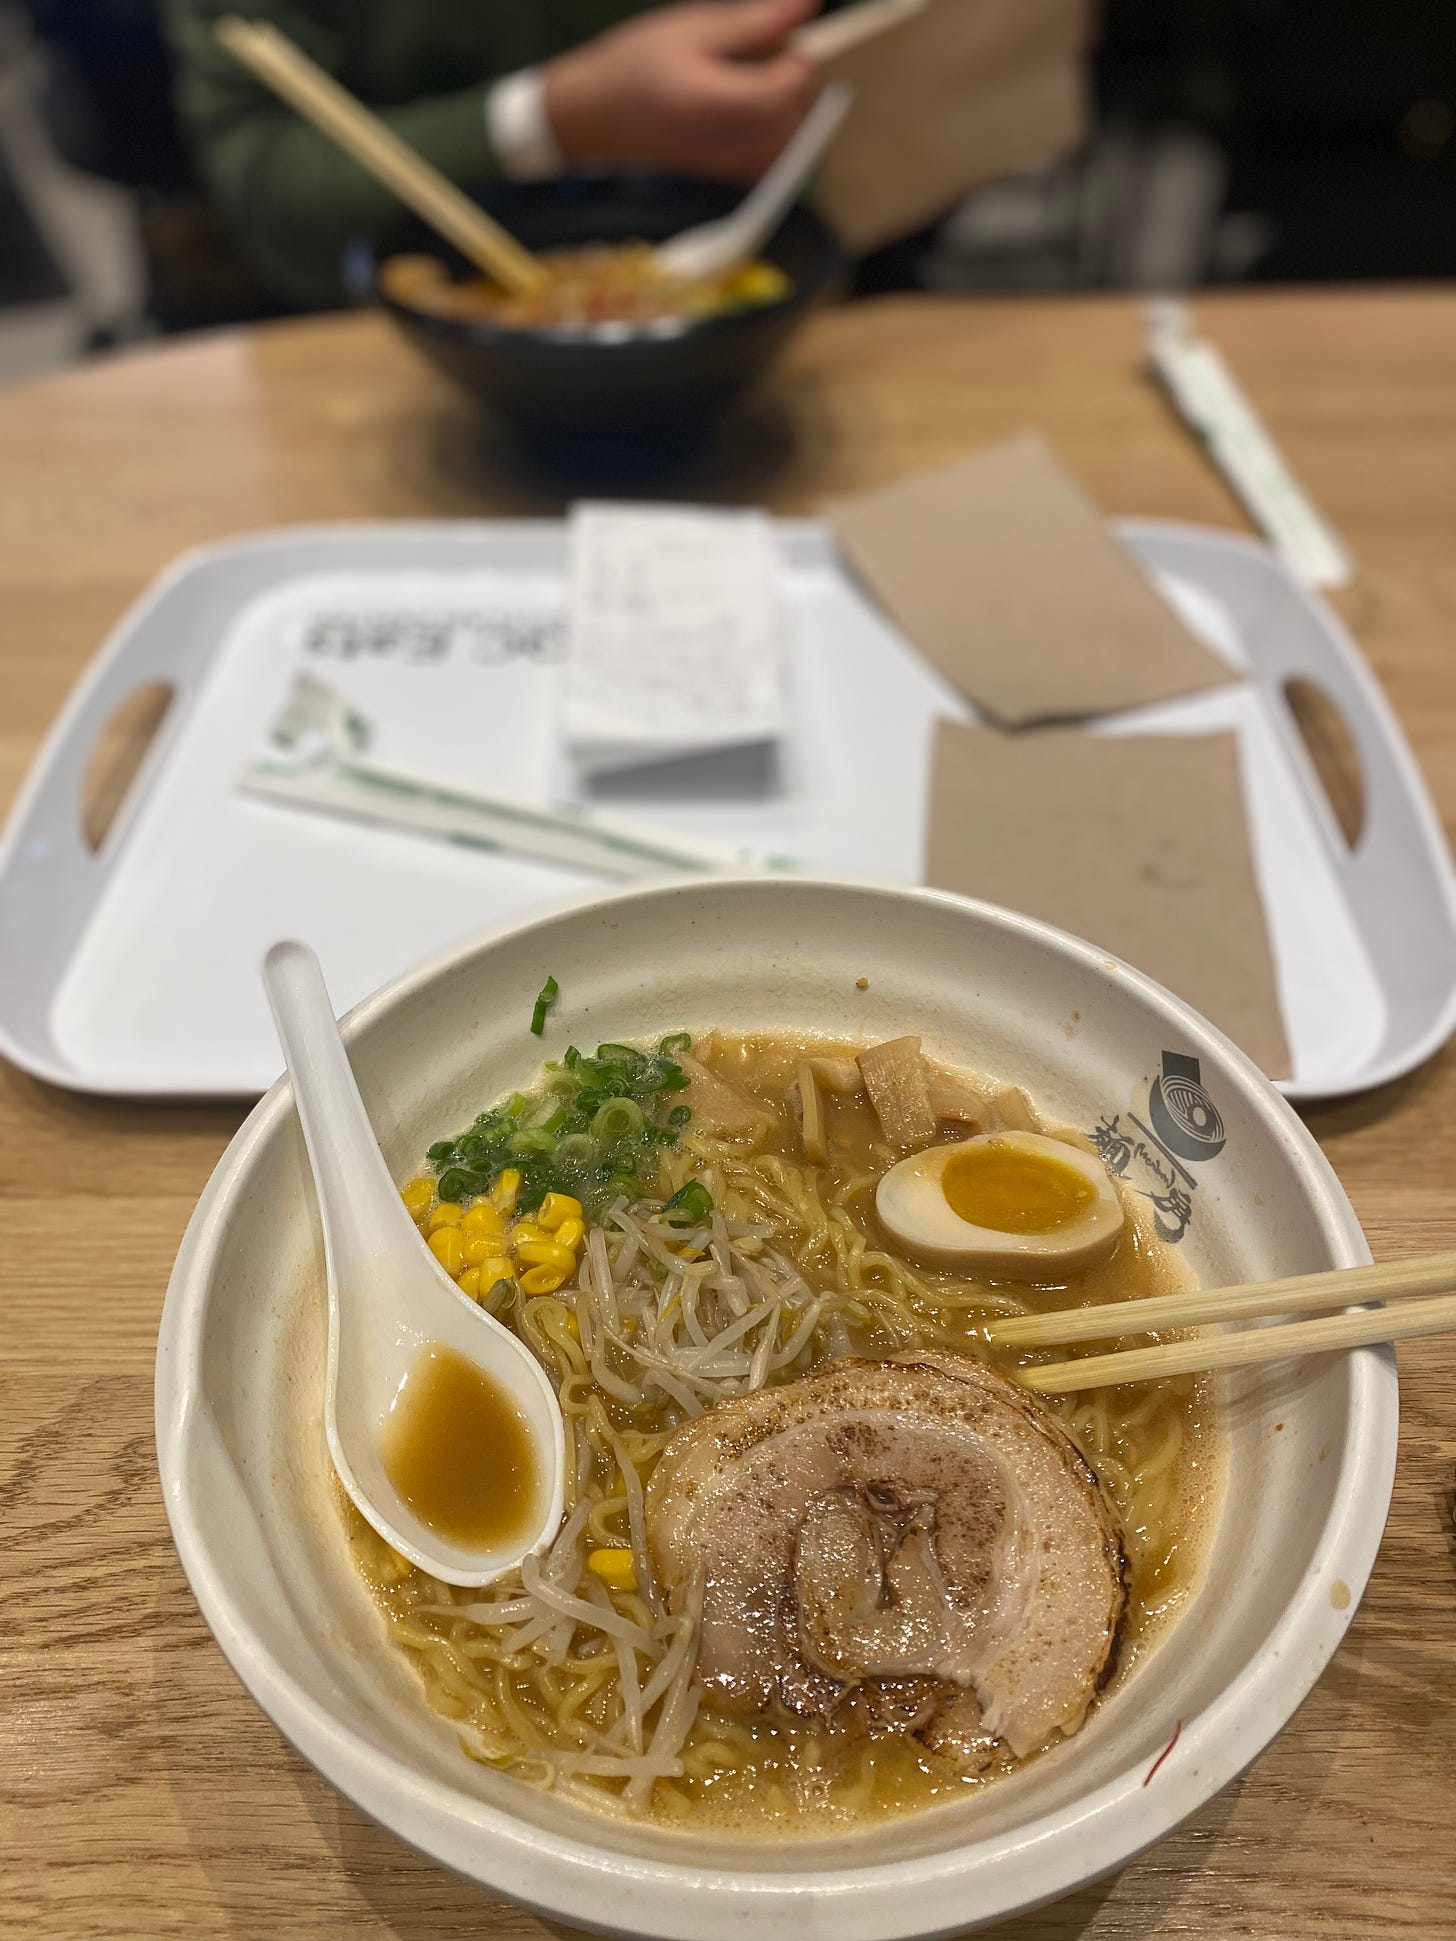 A white bowl of ramen with chashu, corn, bean sprouts, green onions, and half a boiled egg. Jeff's ramen is in a black bowl in the background, and a white tray with brown paper napkins is on the table between them.